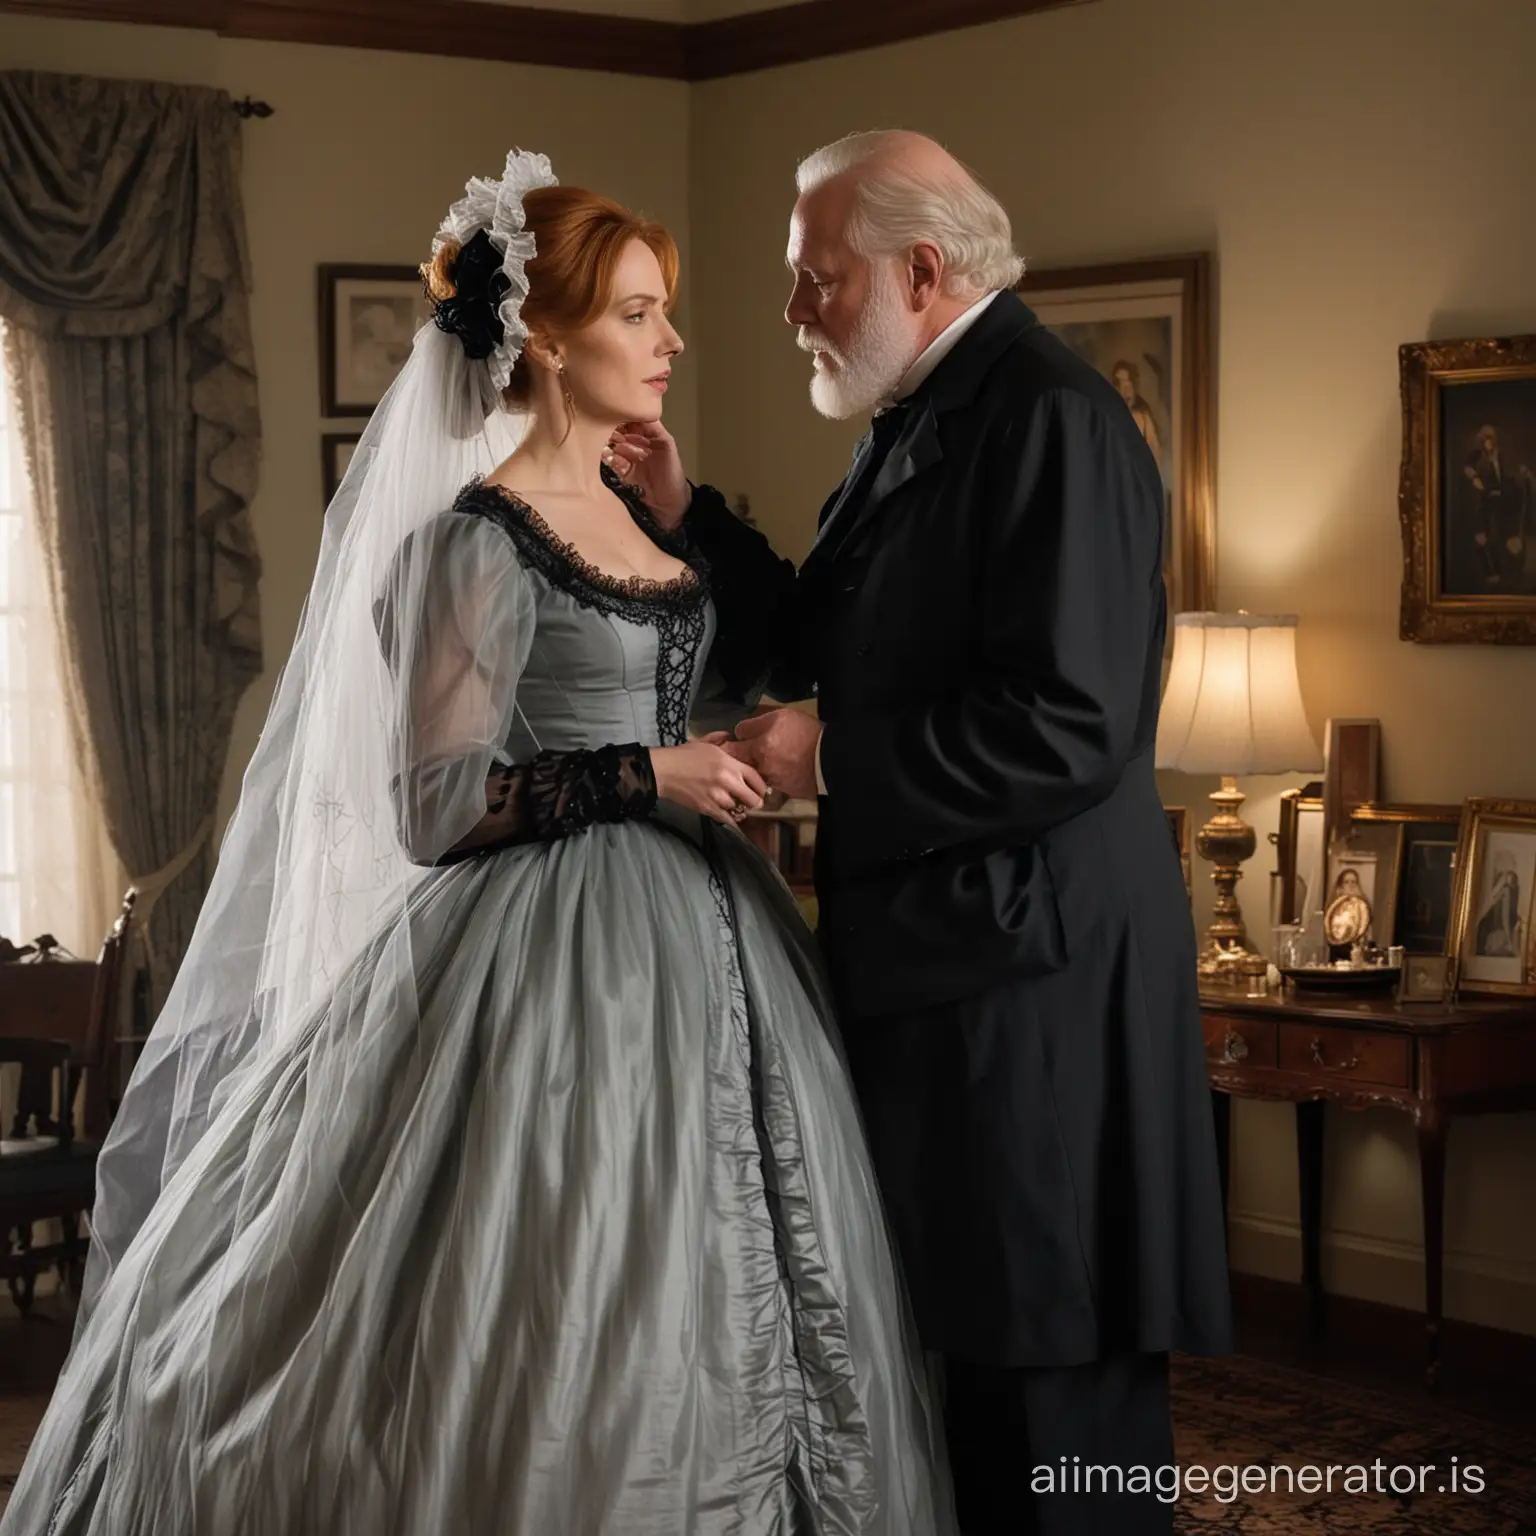 Dana Scully wearing a poofy black floor-length loose billowing 1860 Victorian crinoline dress with a frilly bonnet kissing an old man who seems to be her newlywed husband